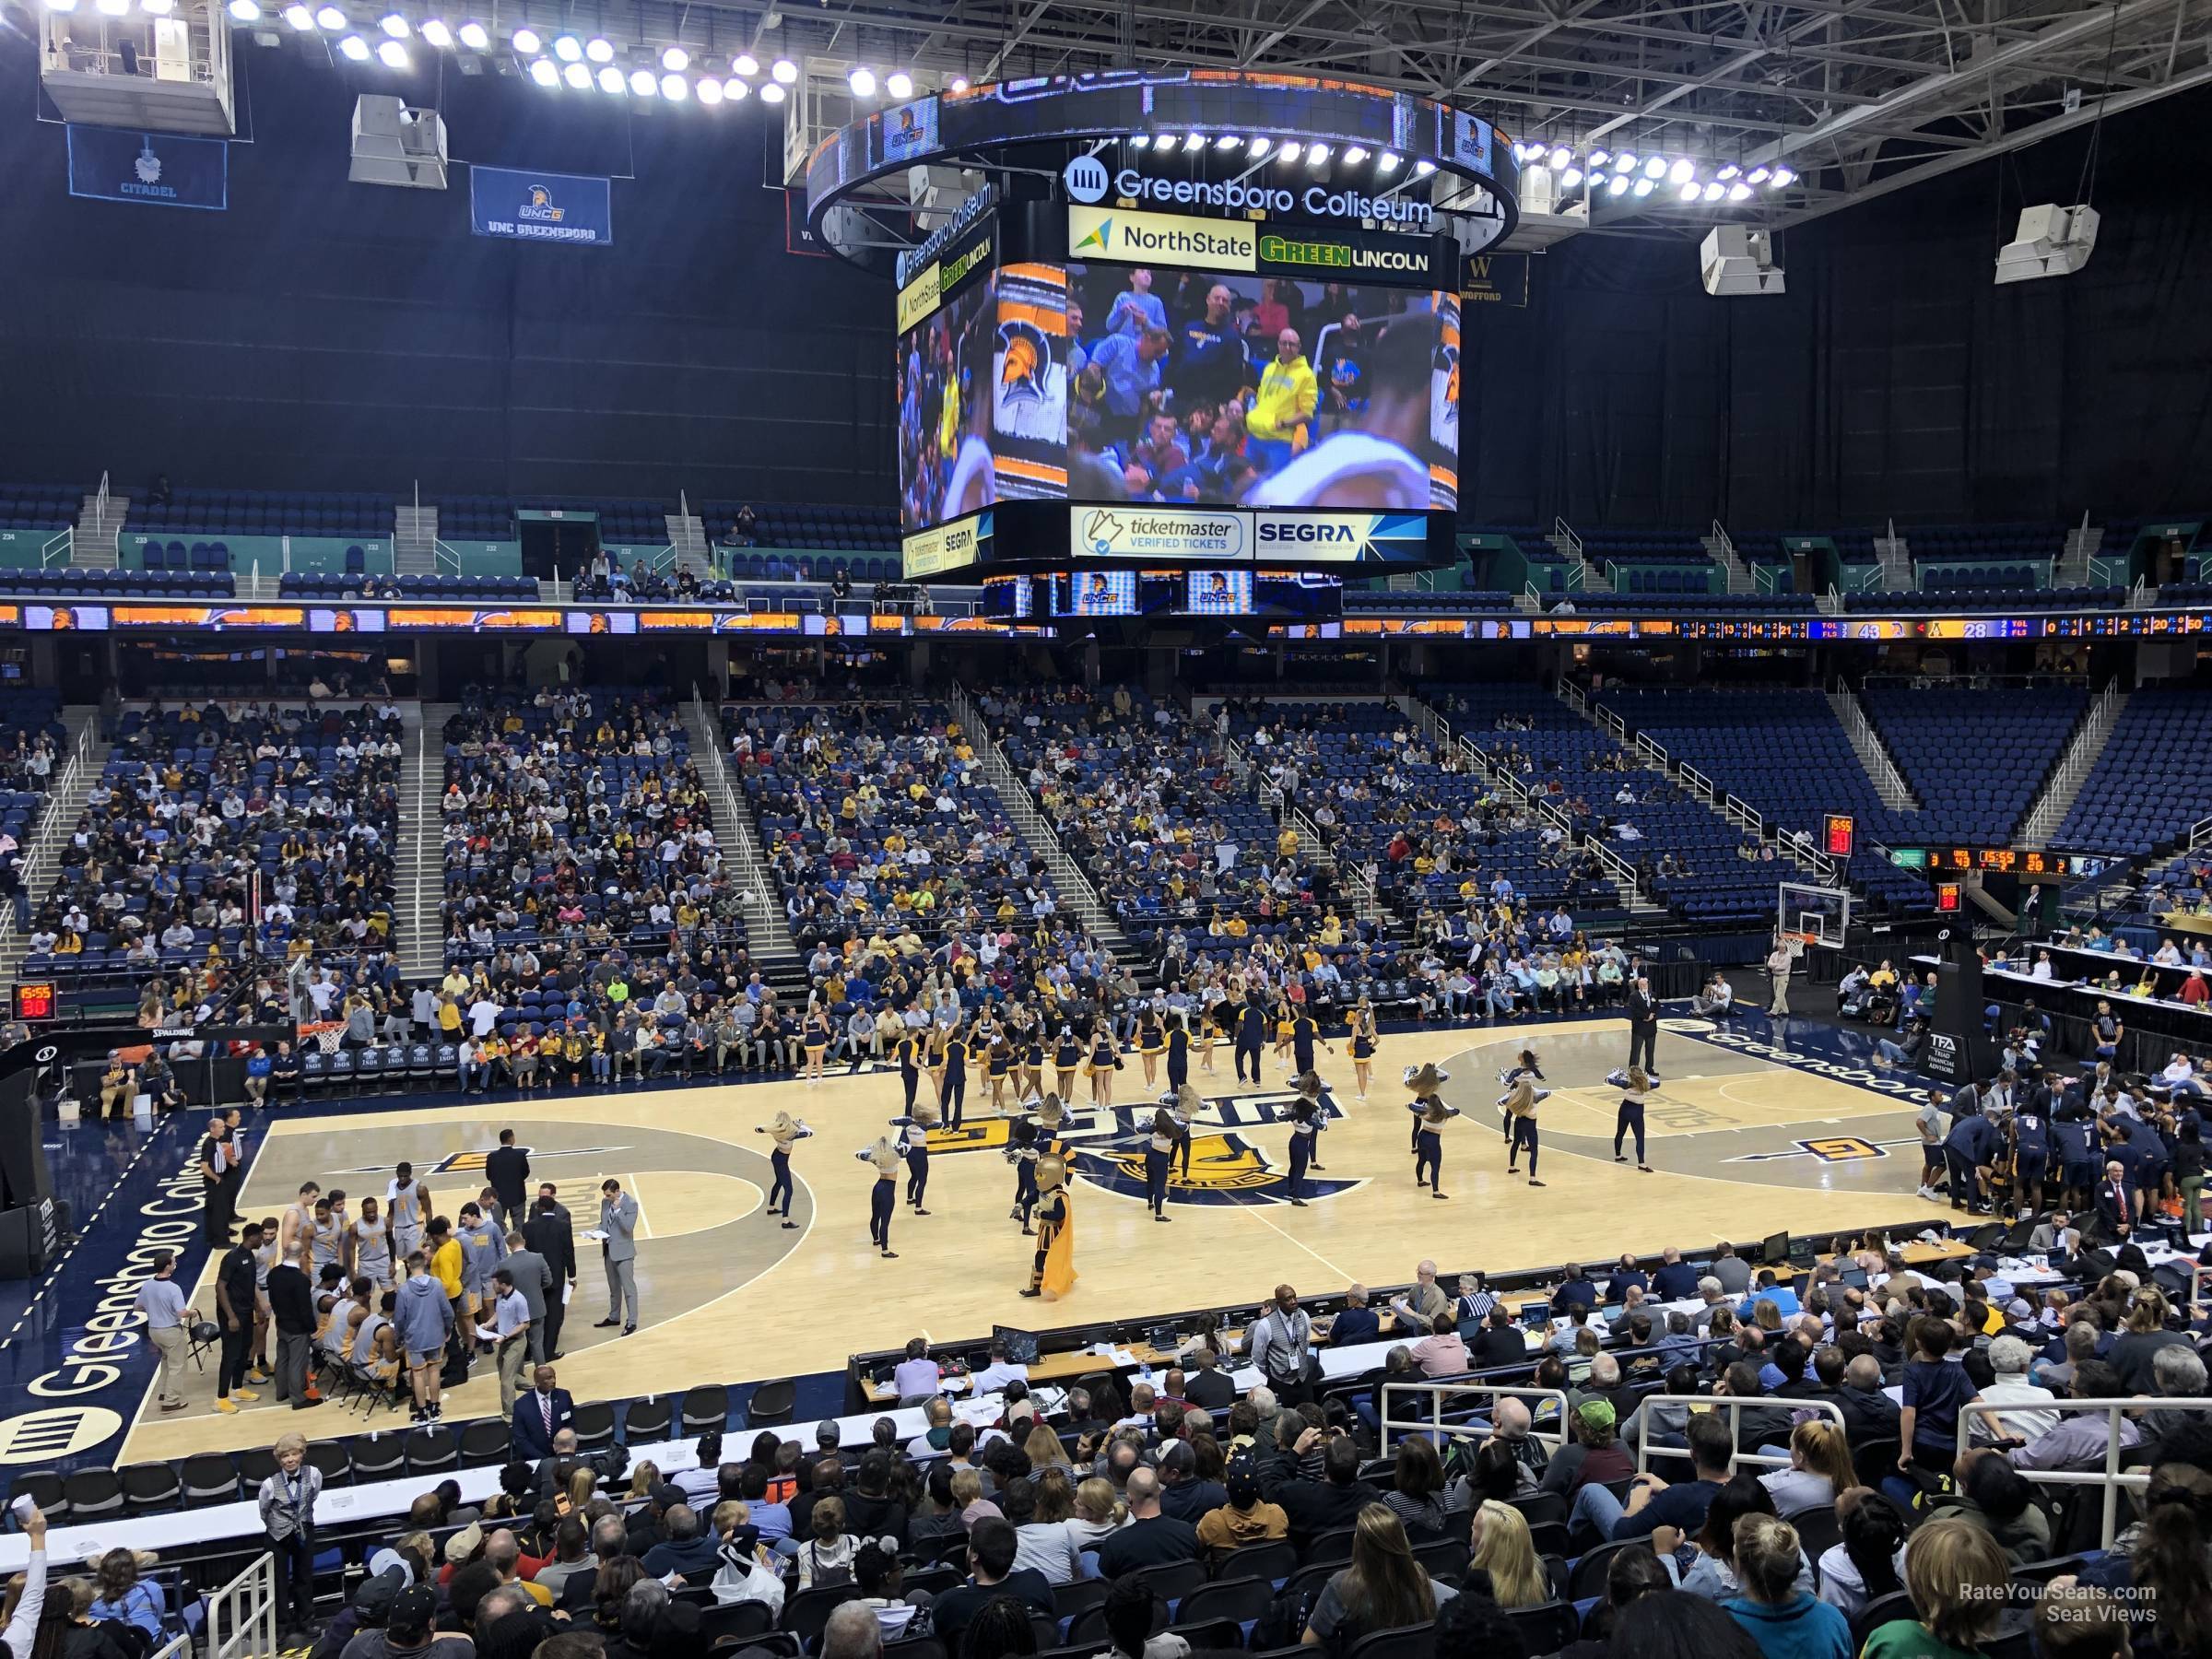 section 108, row ss seat view  for basketball - greensboro coliseum